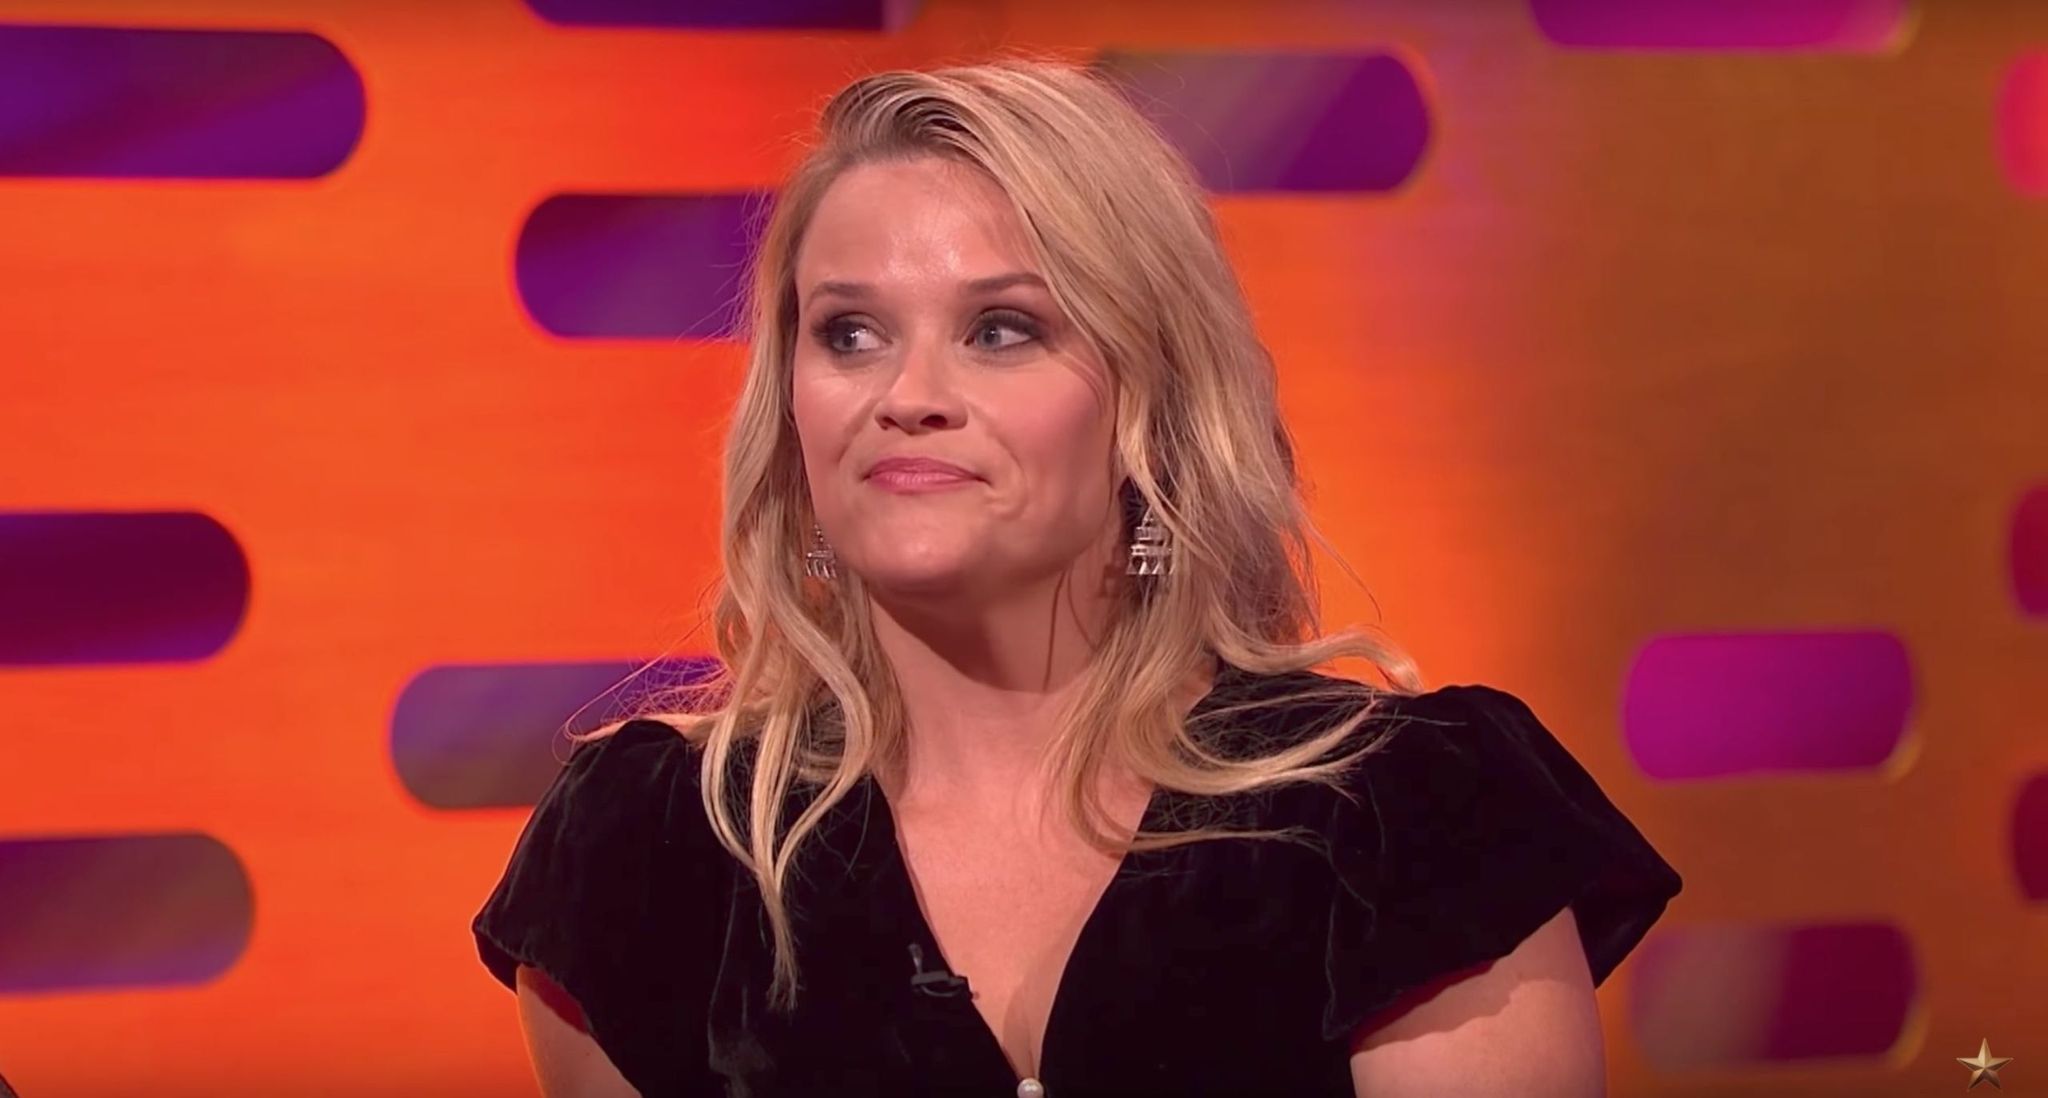 Reese Witherspoon on The Graham Norton Show